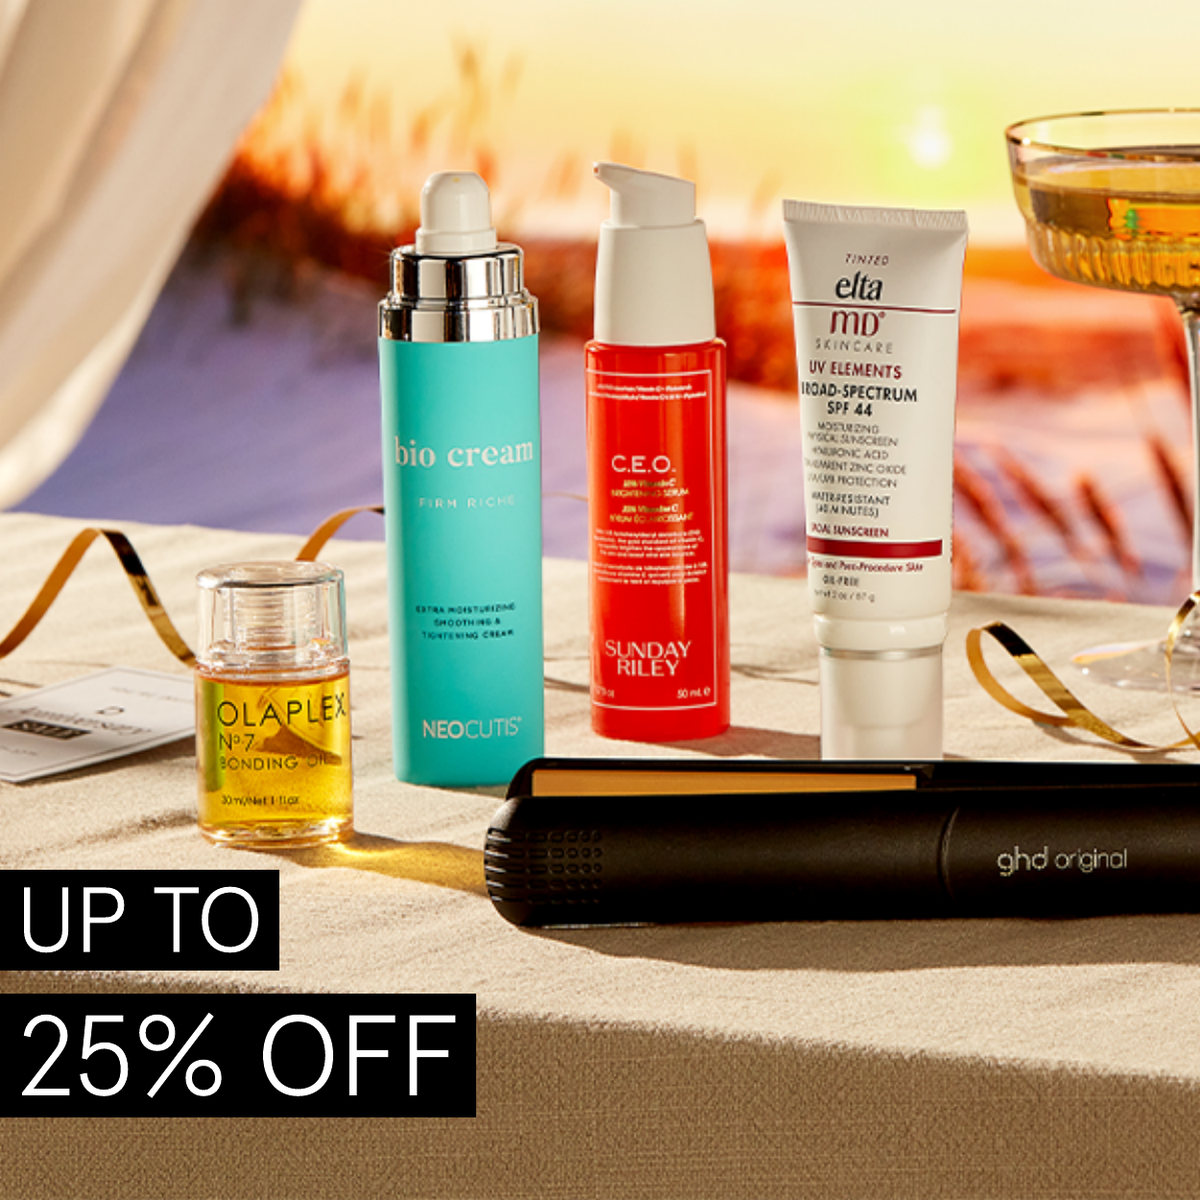 The Anniversary Sale: Up to 25% Off:  Cheers! Our annual celebration comes with great beauty, skin & hair care savings, TRIPLE points on some of our most-loved brands & tons of great surprises.  Code: CHEERS